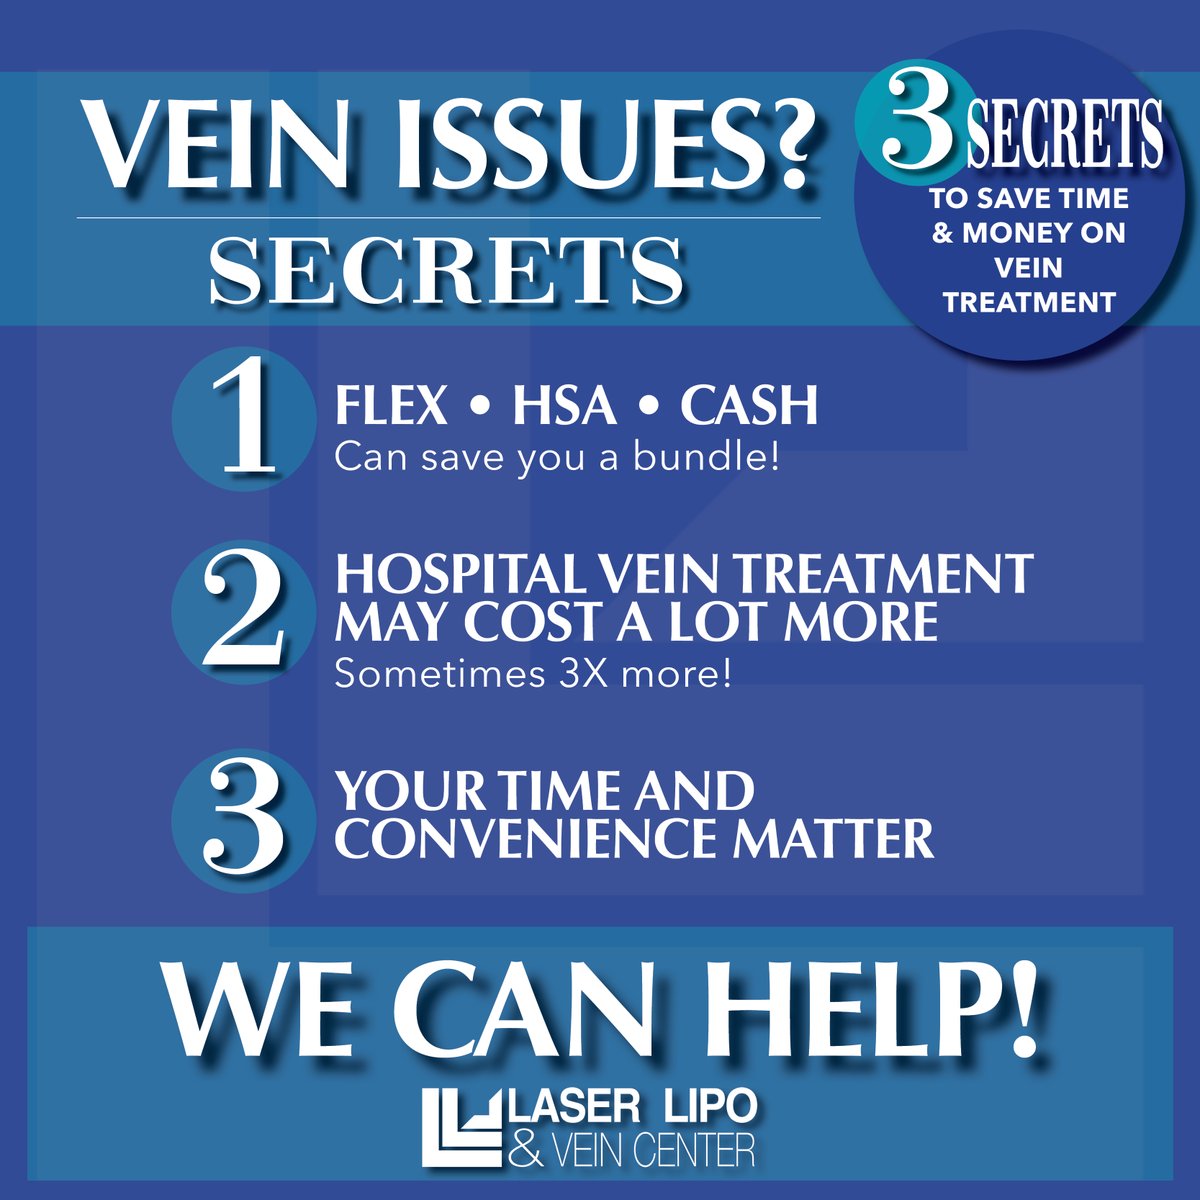 Say goodbye to insurance headaches and hello to cost-effective varicose vein treatment! 💰 Learn how cash, flex spending, or HSAs can simplify your journey while avoiding unnecessary expenses. It's time for a smarter approach to healthcare payments. #VaricoseVeins #VeinTreatment